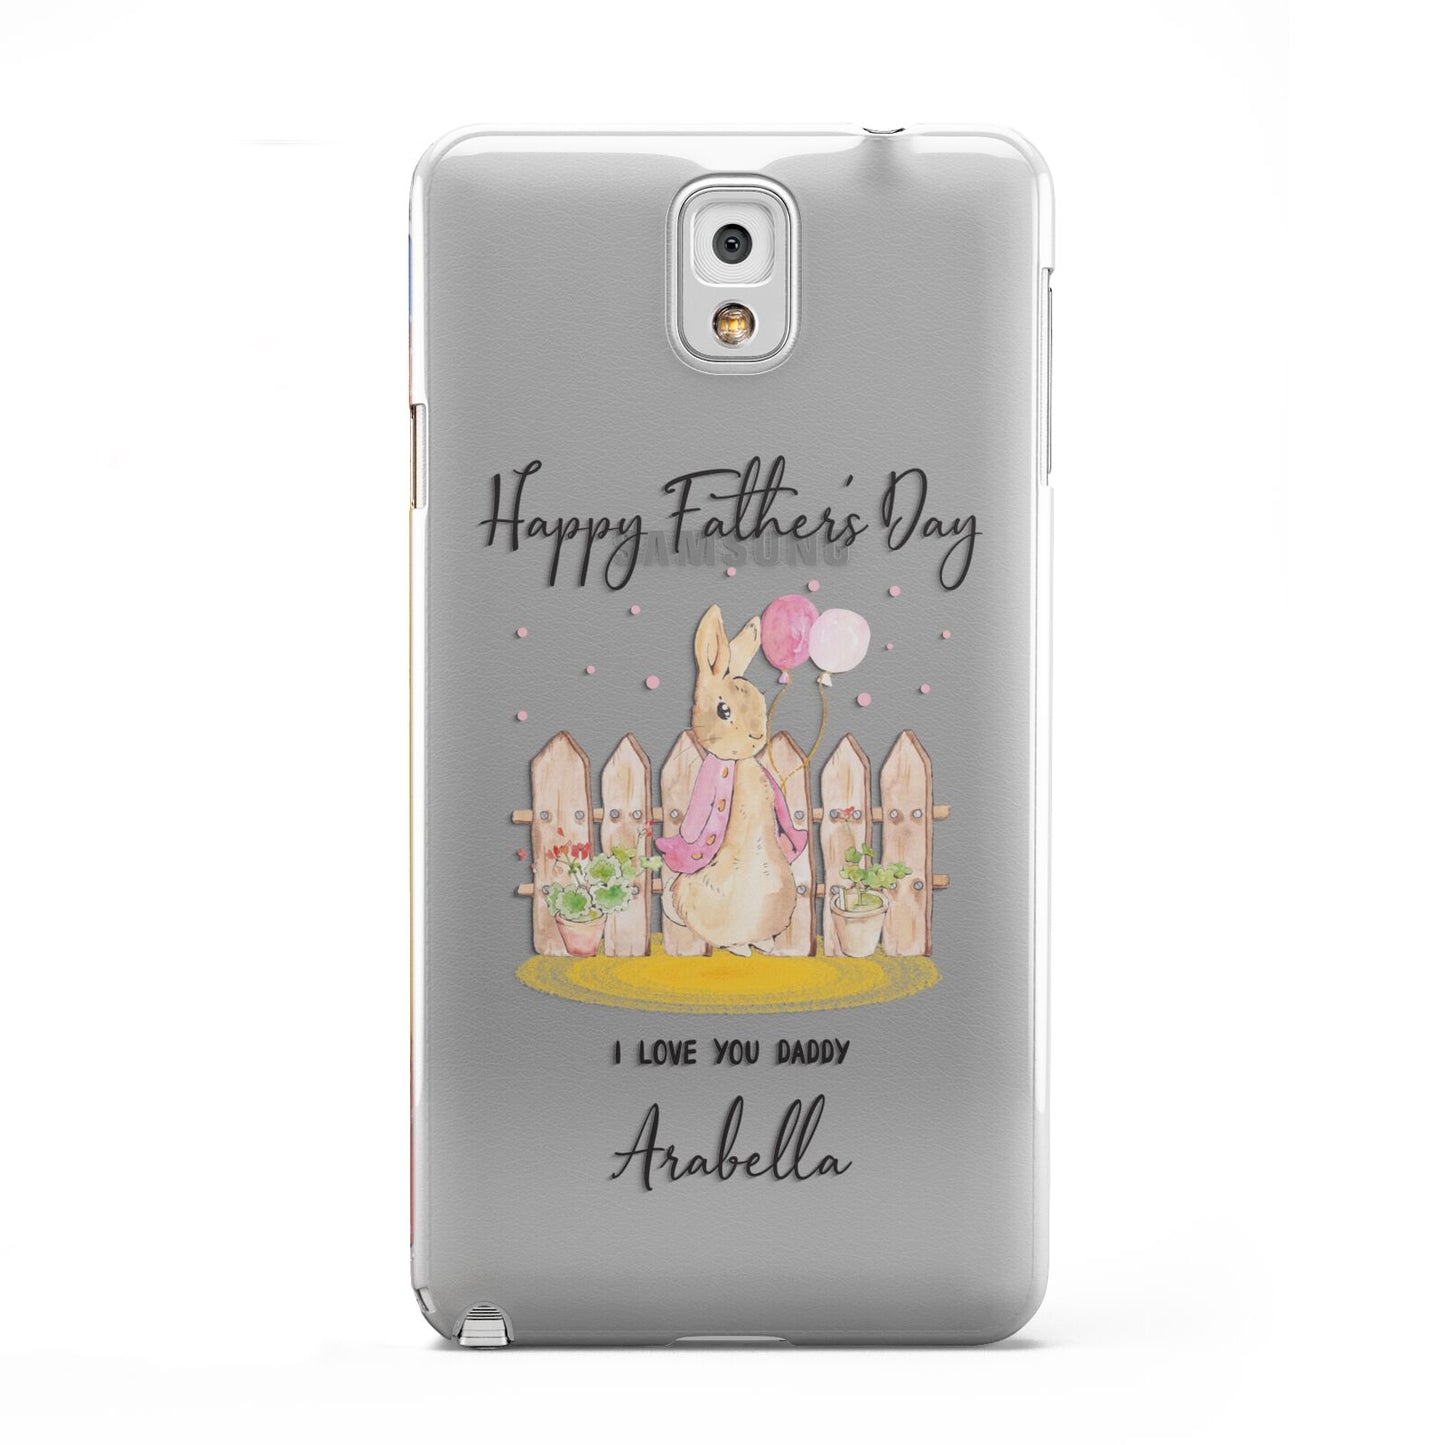 Fathers Day Girl Rabbit Samsung Galaxy Note 3 Case